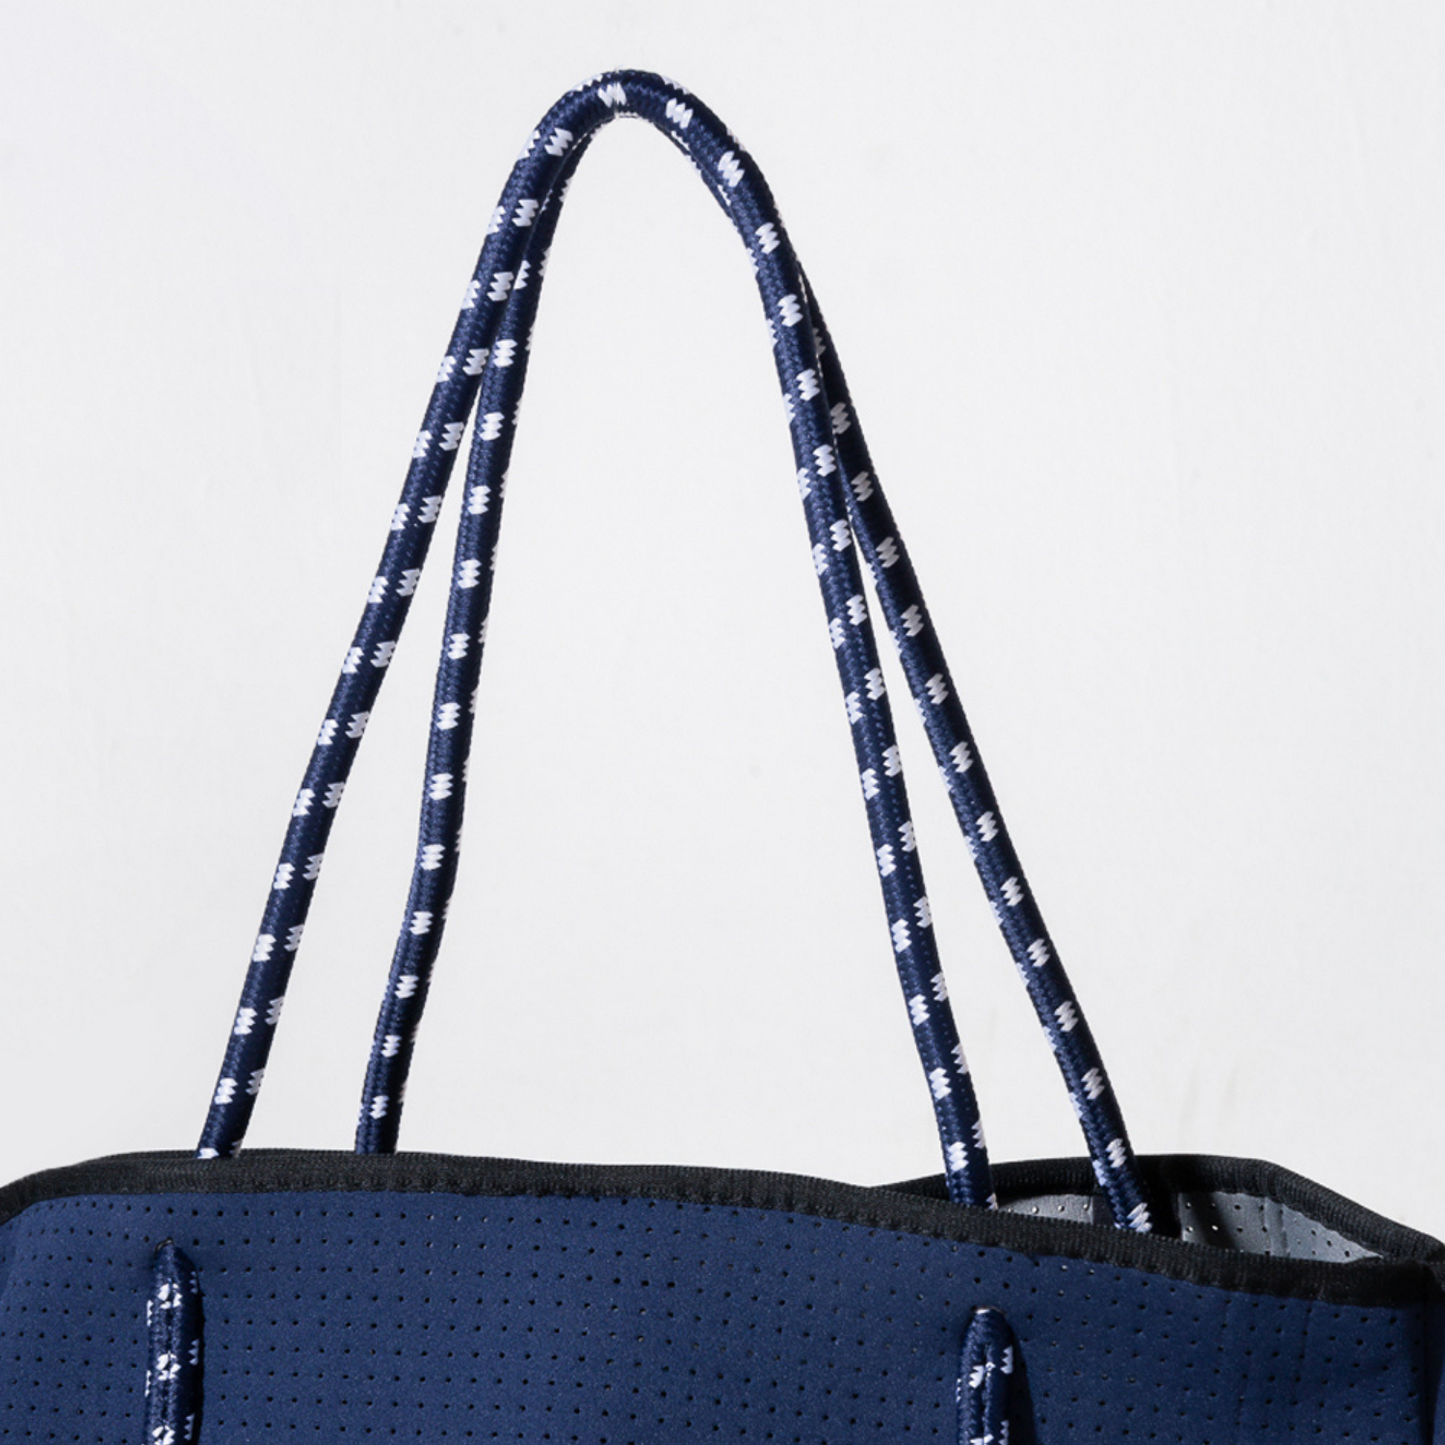 EVERYDAY TOTE DEEP BLUE